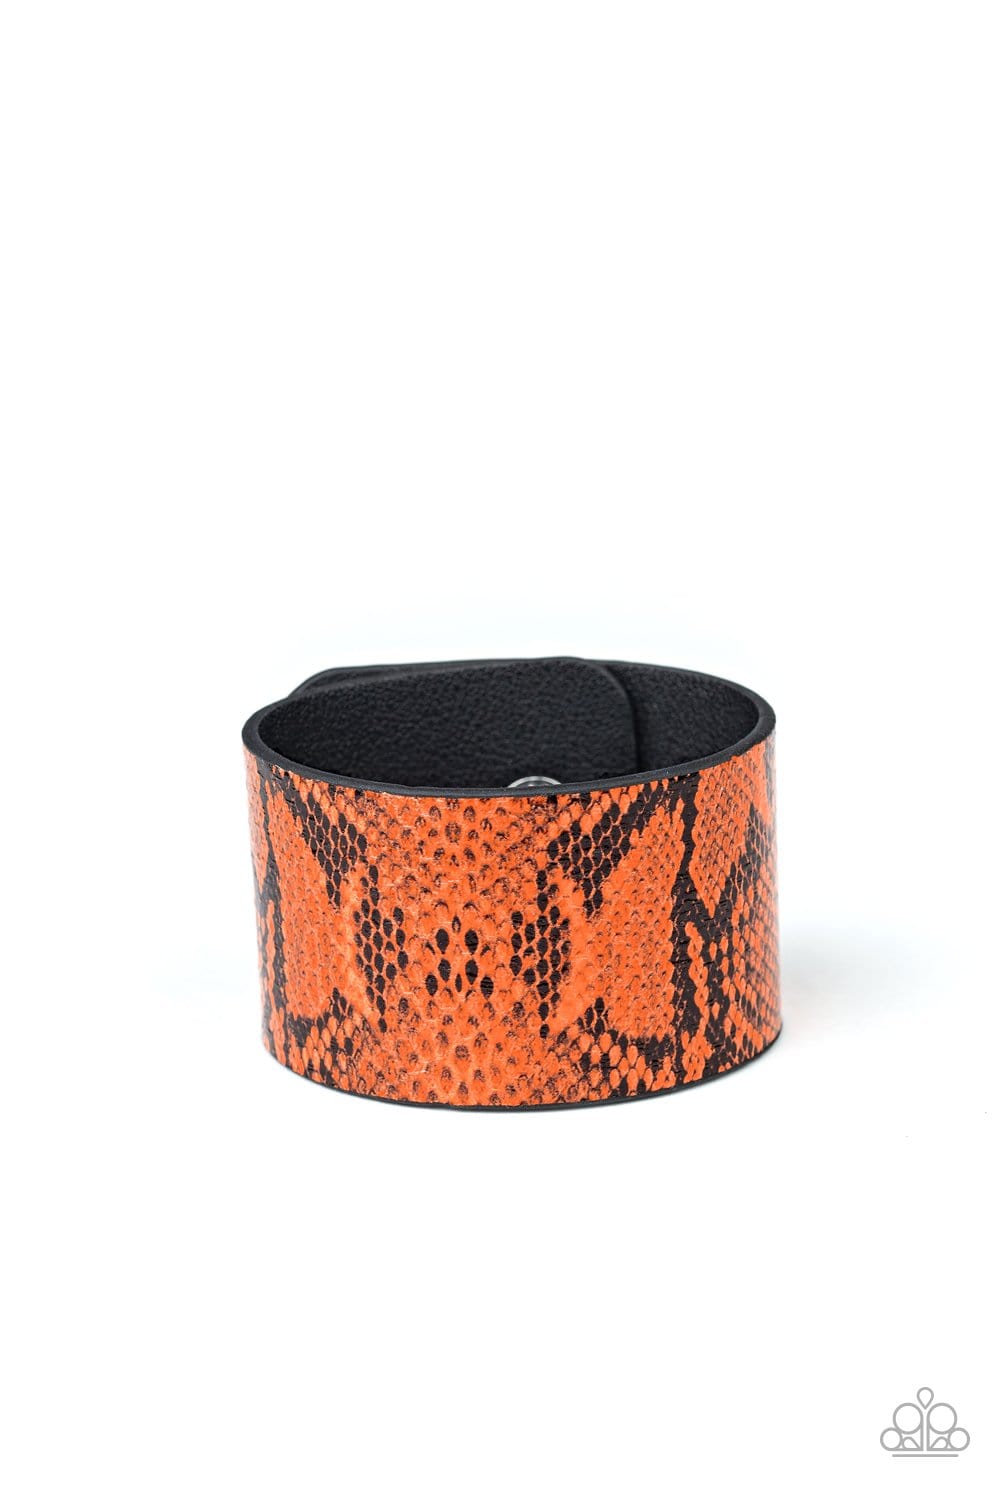 Paparazzi: Its a Jungle Out There - Orange Neon Python Bracelet - Jewels N’ Thingz Boutique